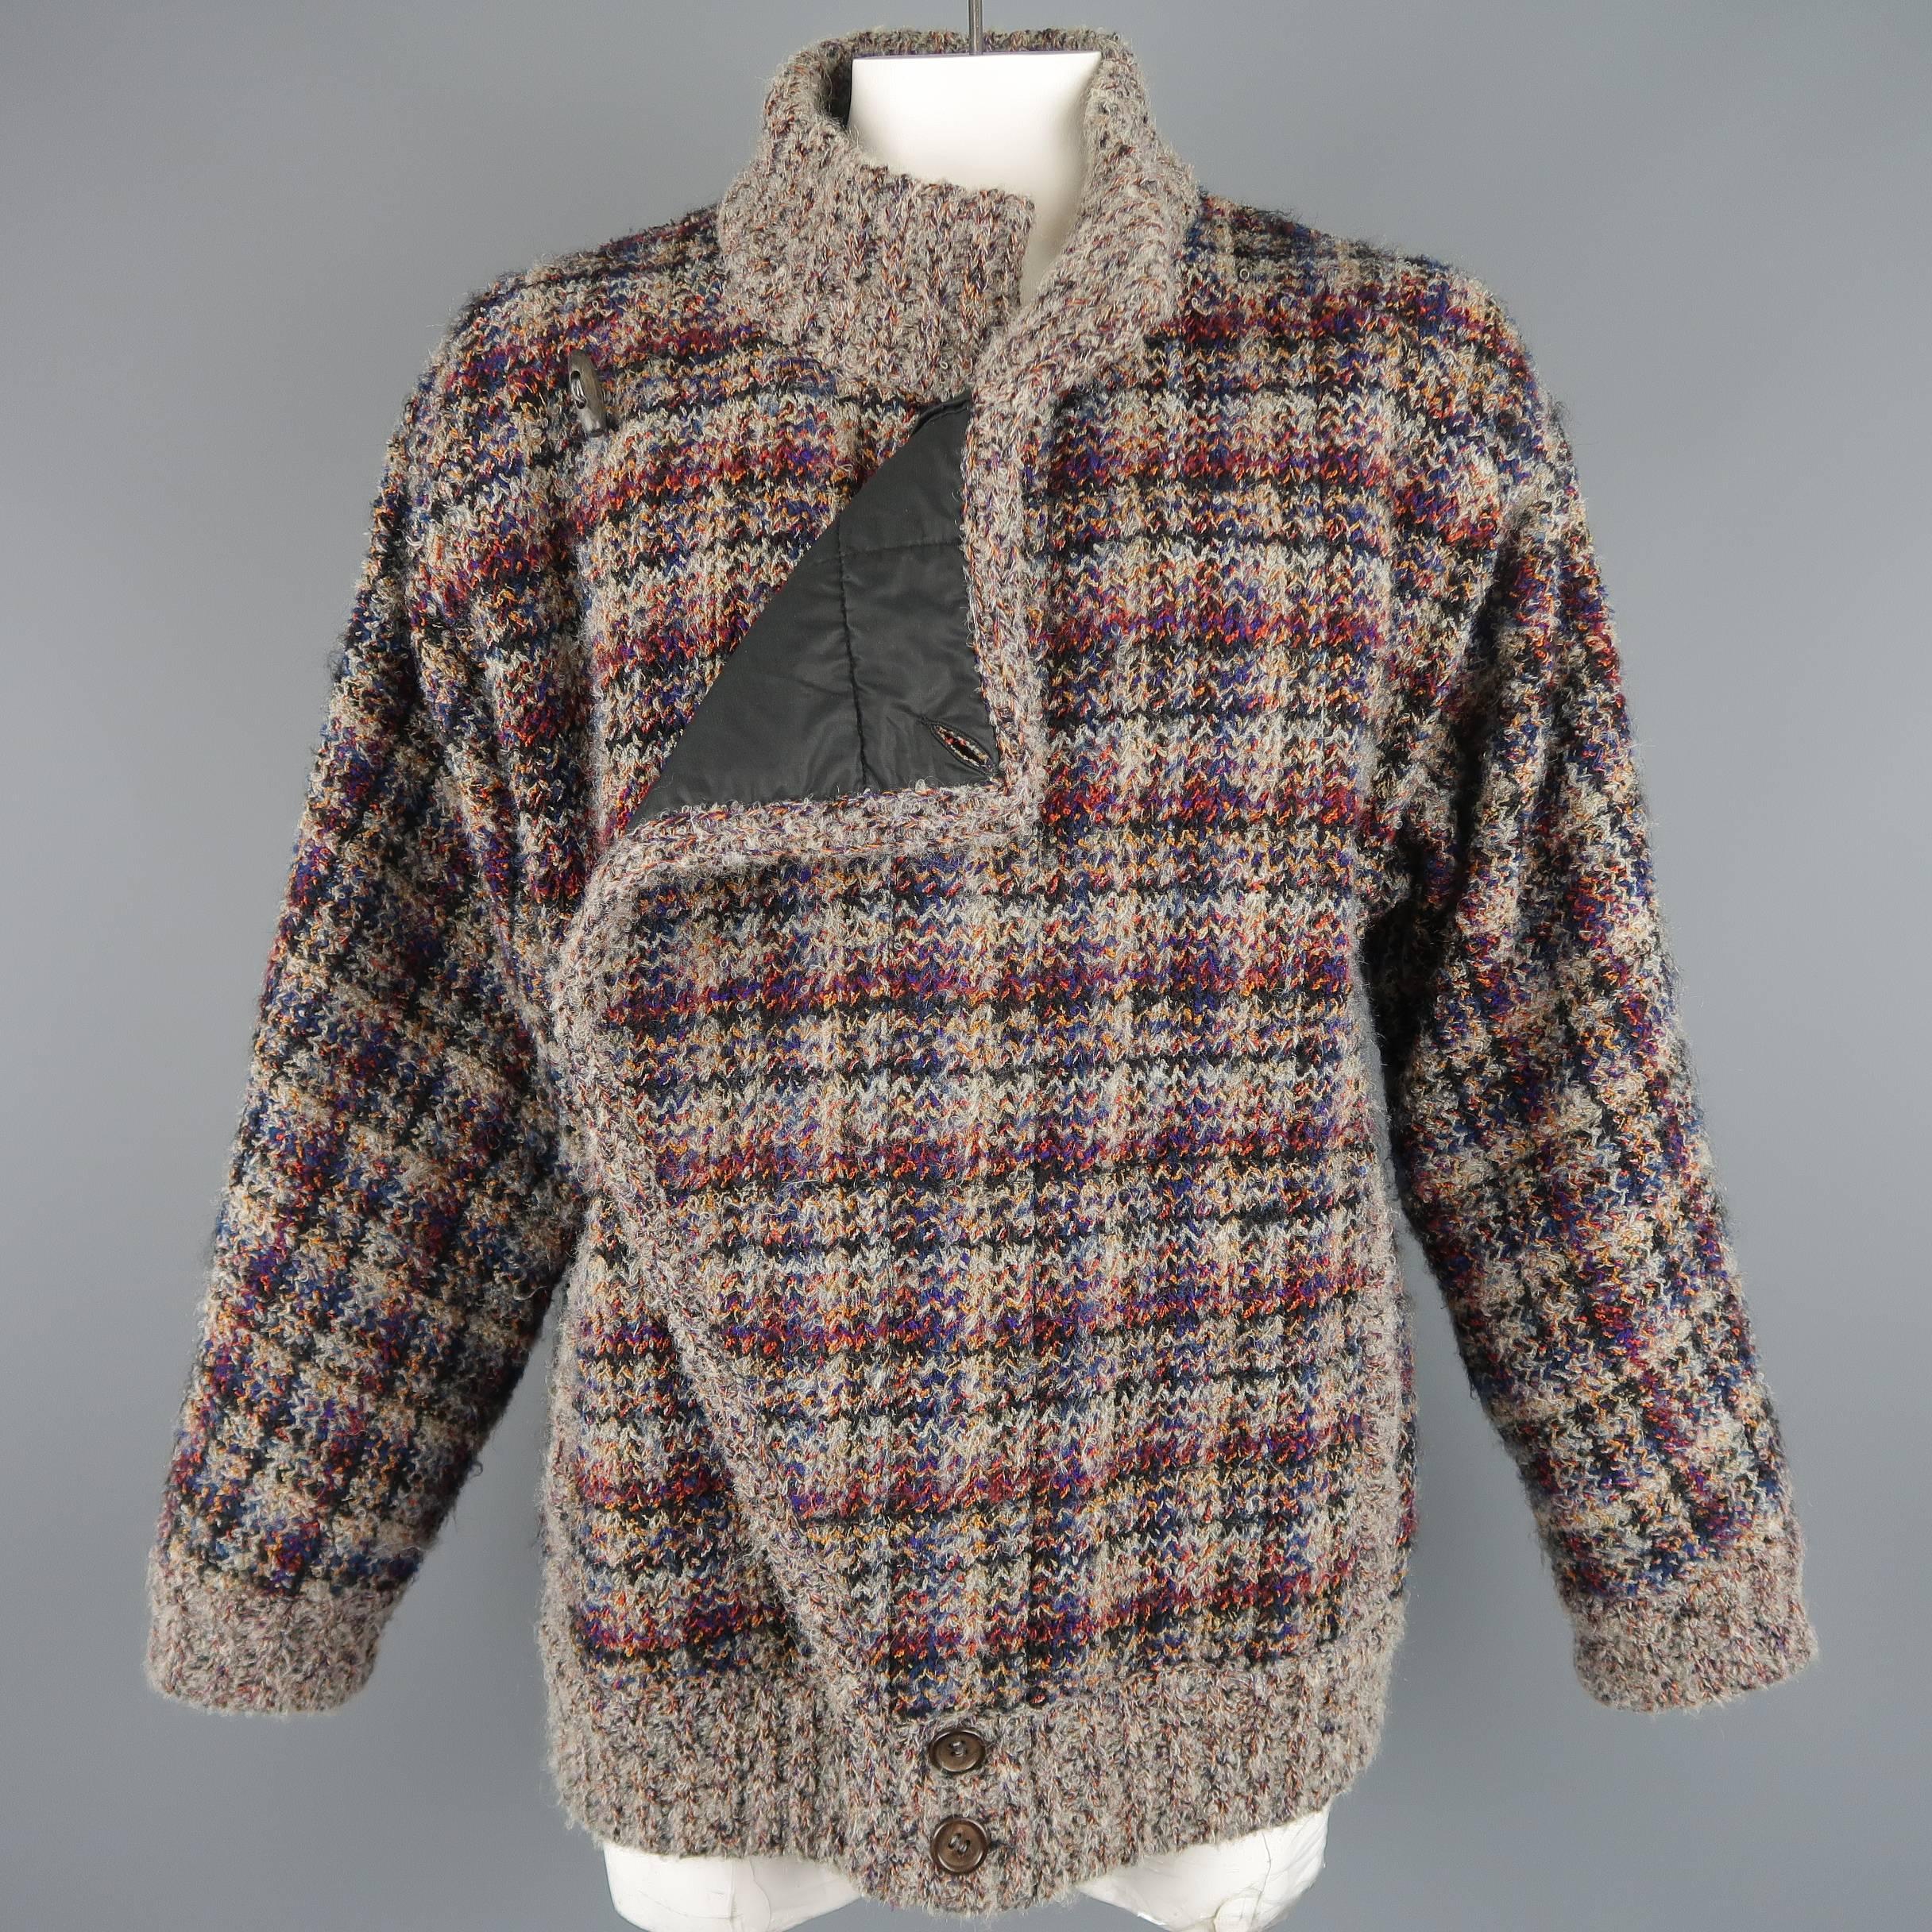 Vintage MISSONI jacket comes in neutral gray and multi-color plaid textured wool knit material with a high collar, double breasted closure, and can be worn reversible. No tag. As-is. Made in Italy.
 
Good Pre-Owned Condition.
Marked: (no size)
